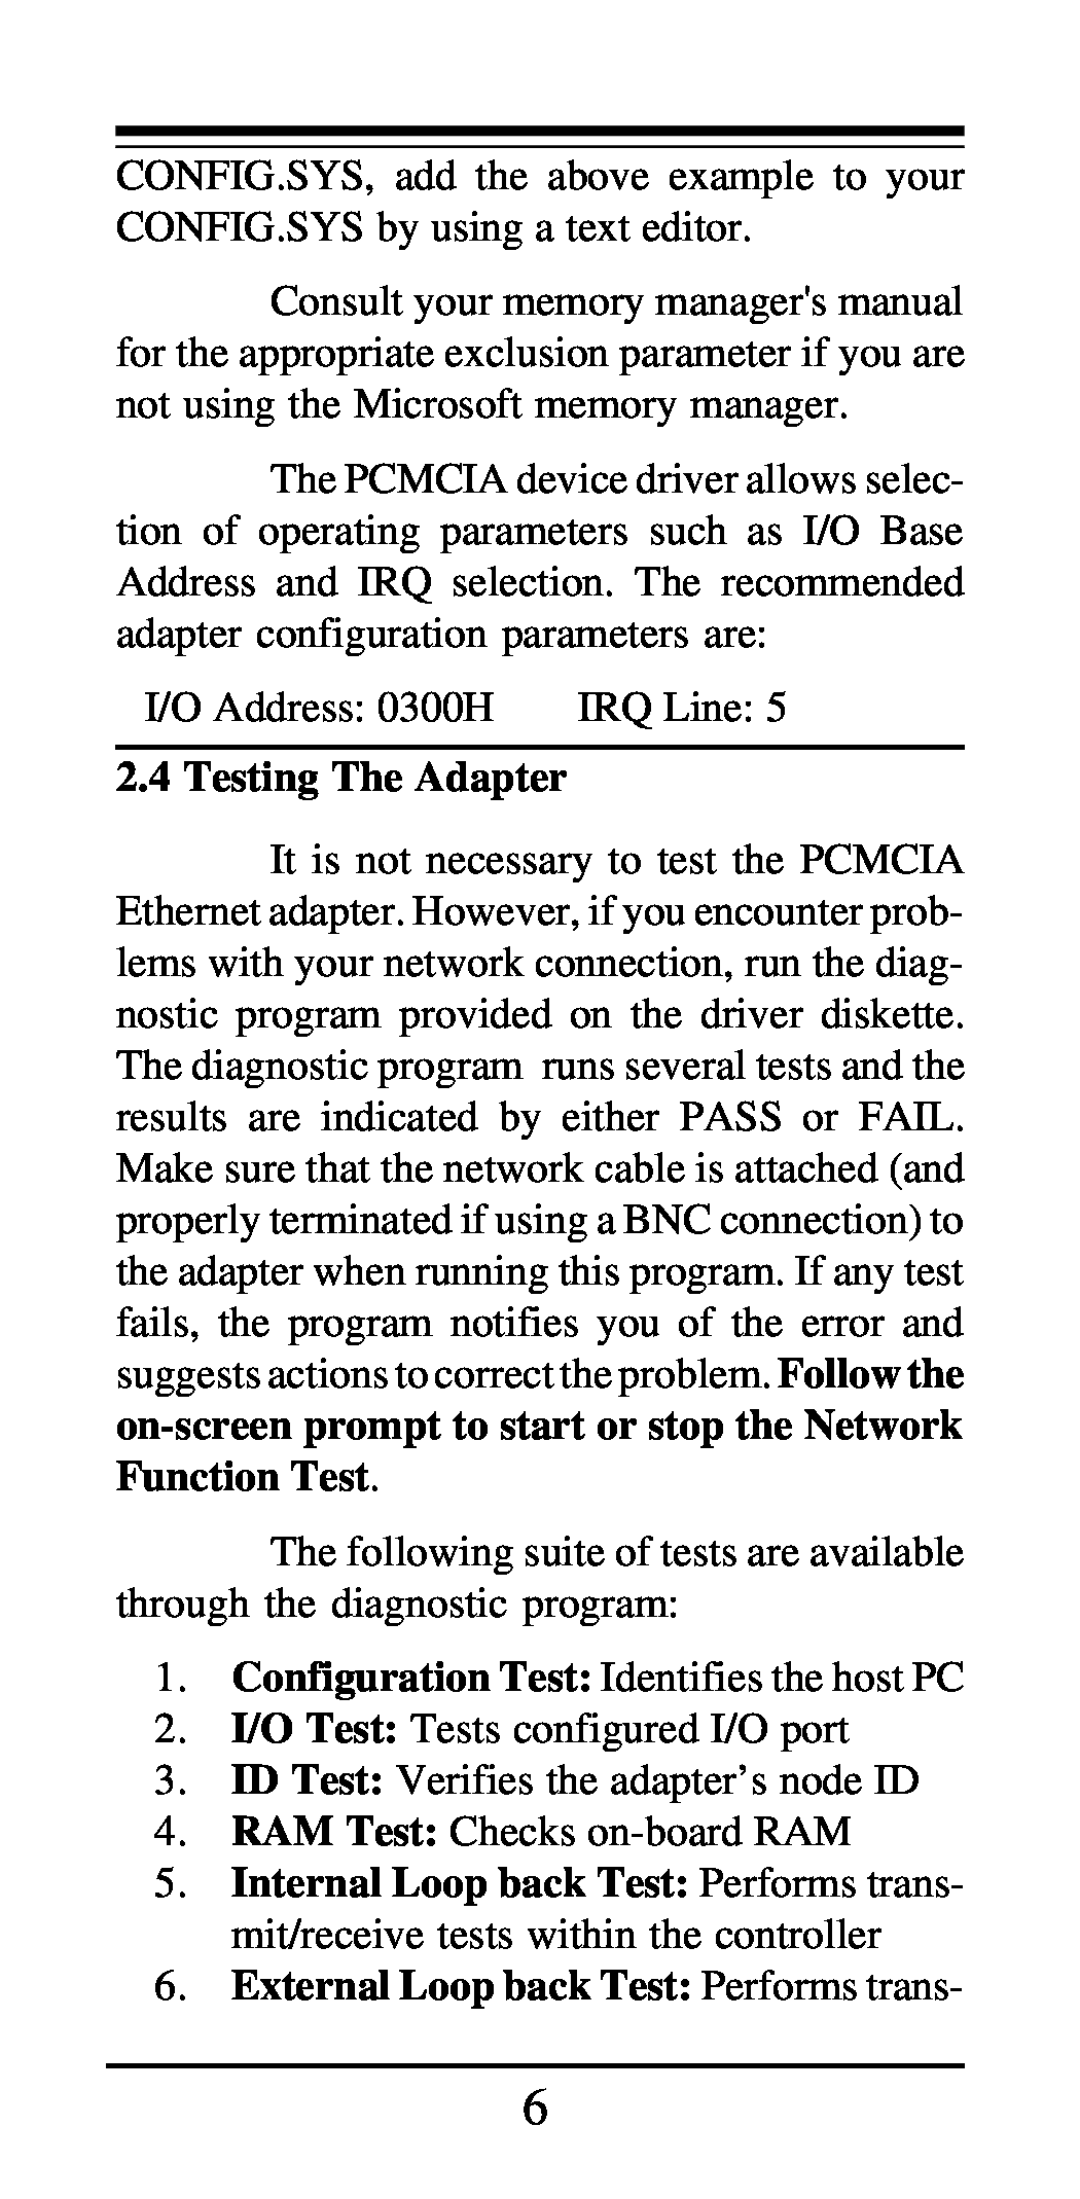 MaxTech PCN2000 Series manual Testing The Adapter, on-screen prompt to start or stop the Network Function Test 